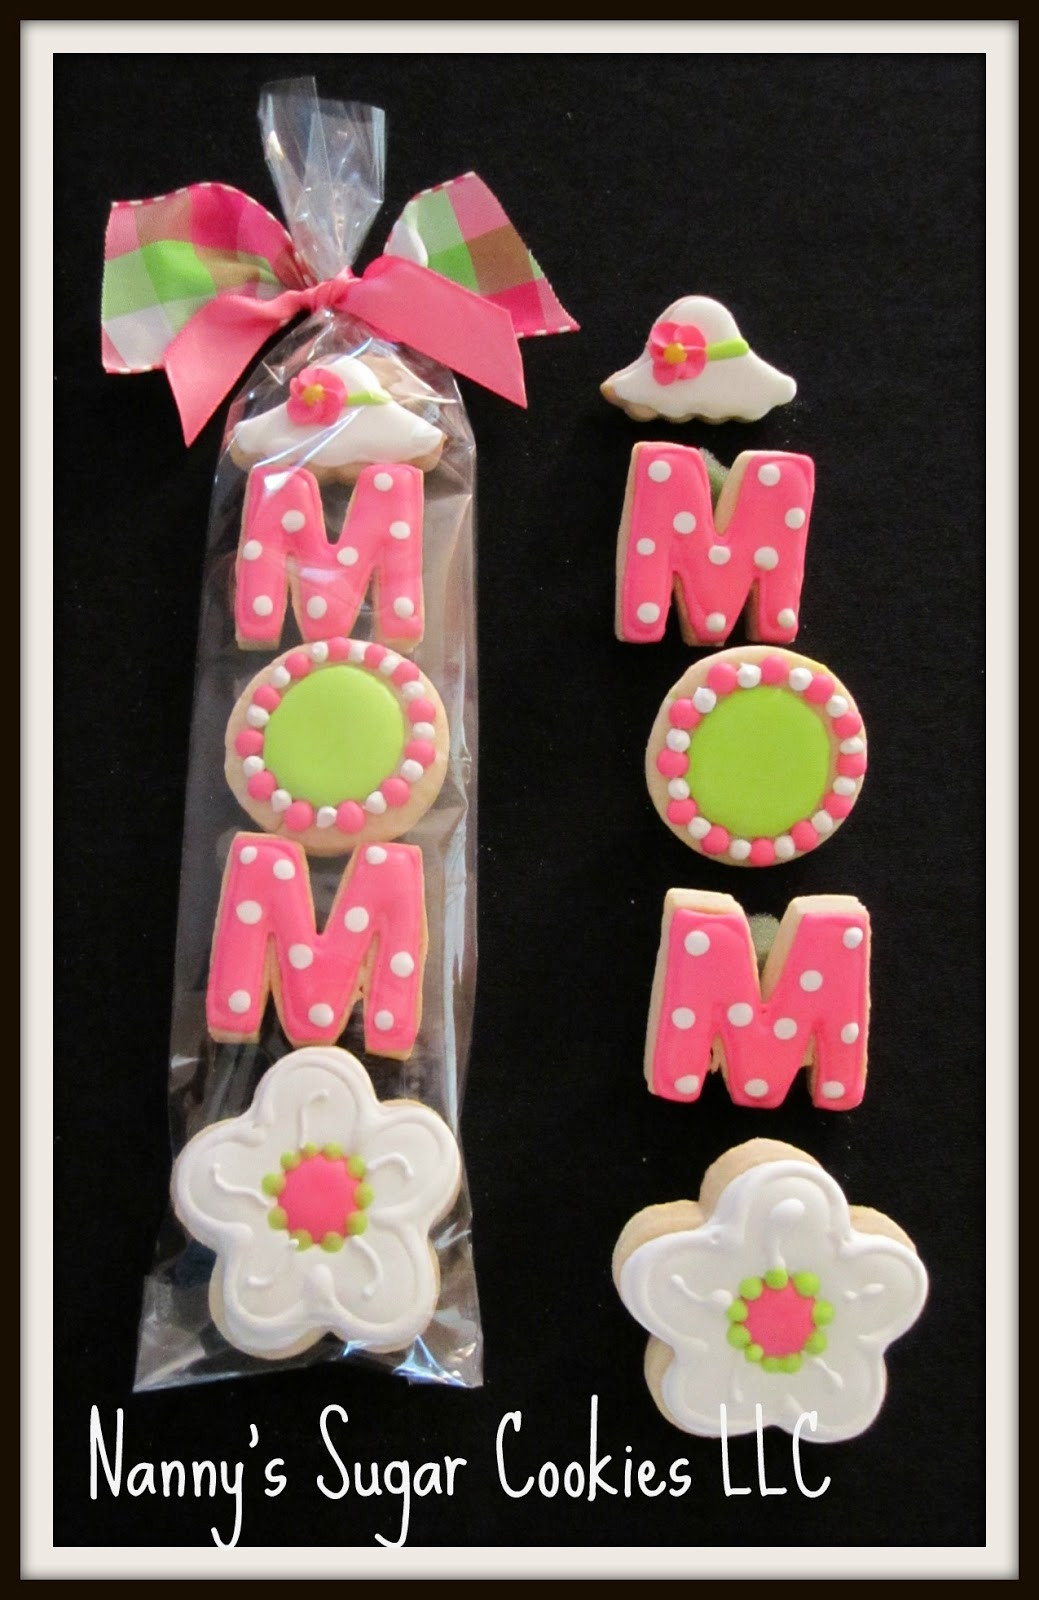 Mother'S Day Sugar Cookies
 Nanny s Sugar Cookies LLC Mother s Day 2013